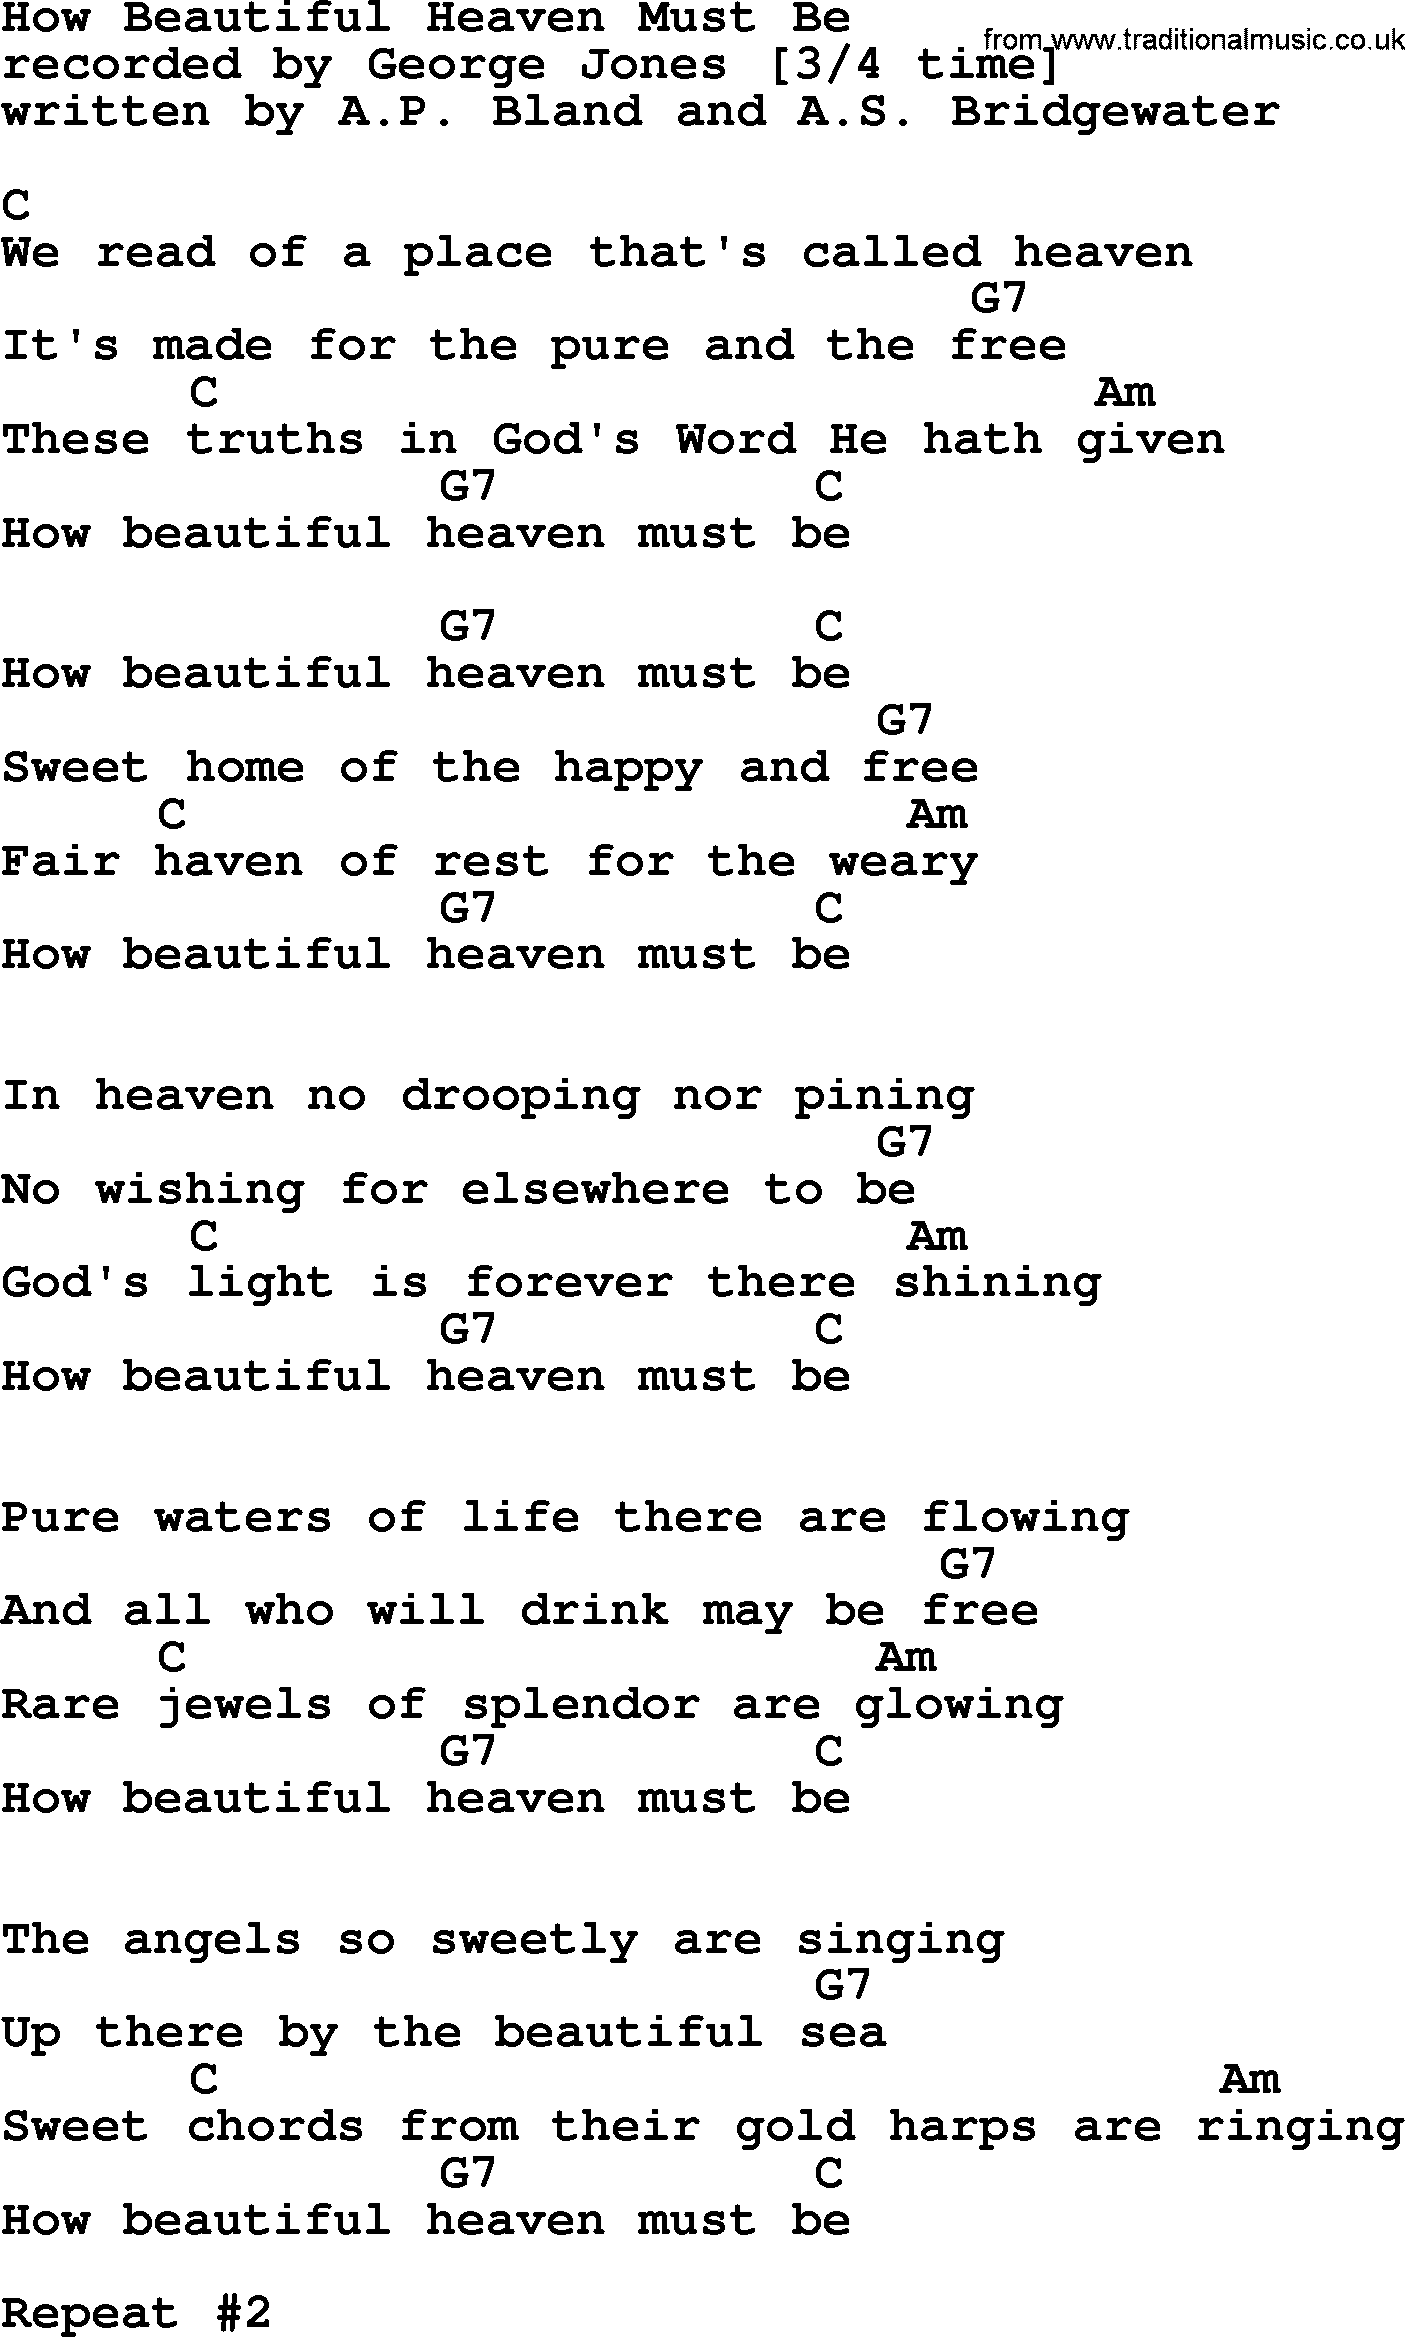 George Jones song: How Beautiful Heaven Must Be, lyrics and chords